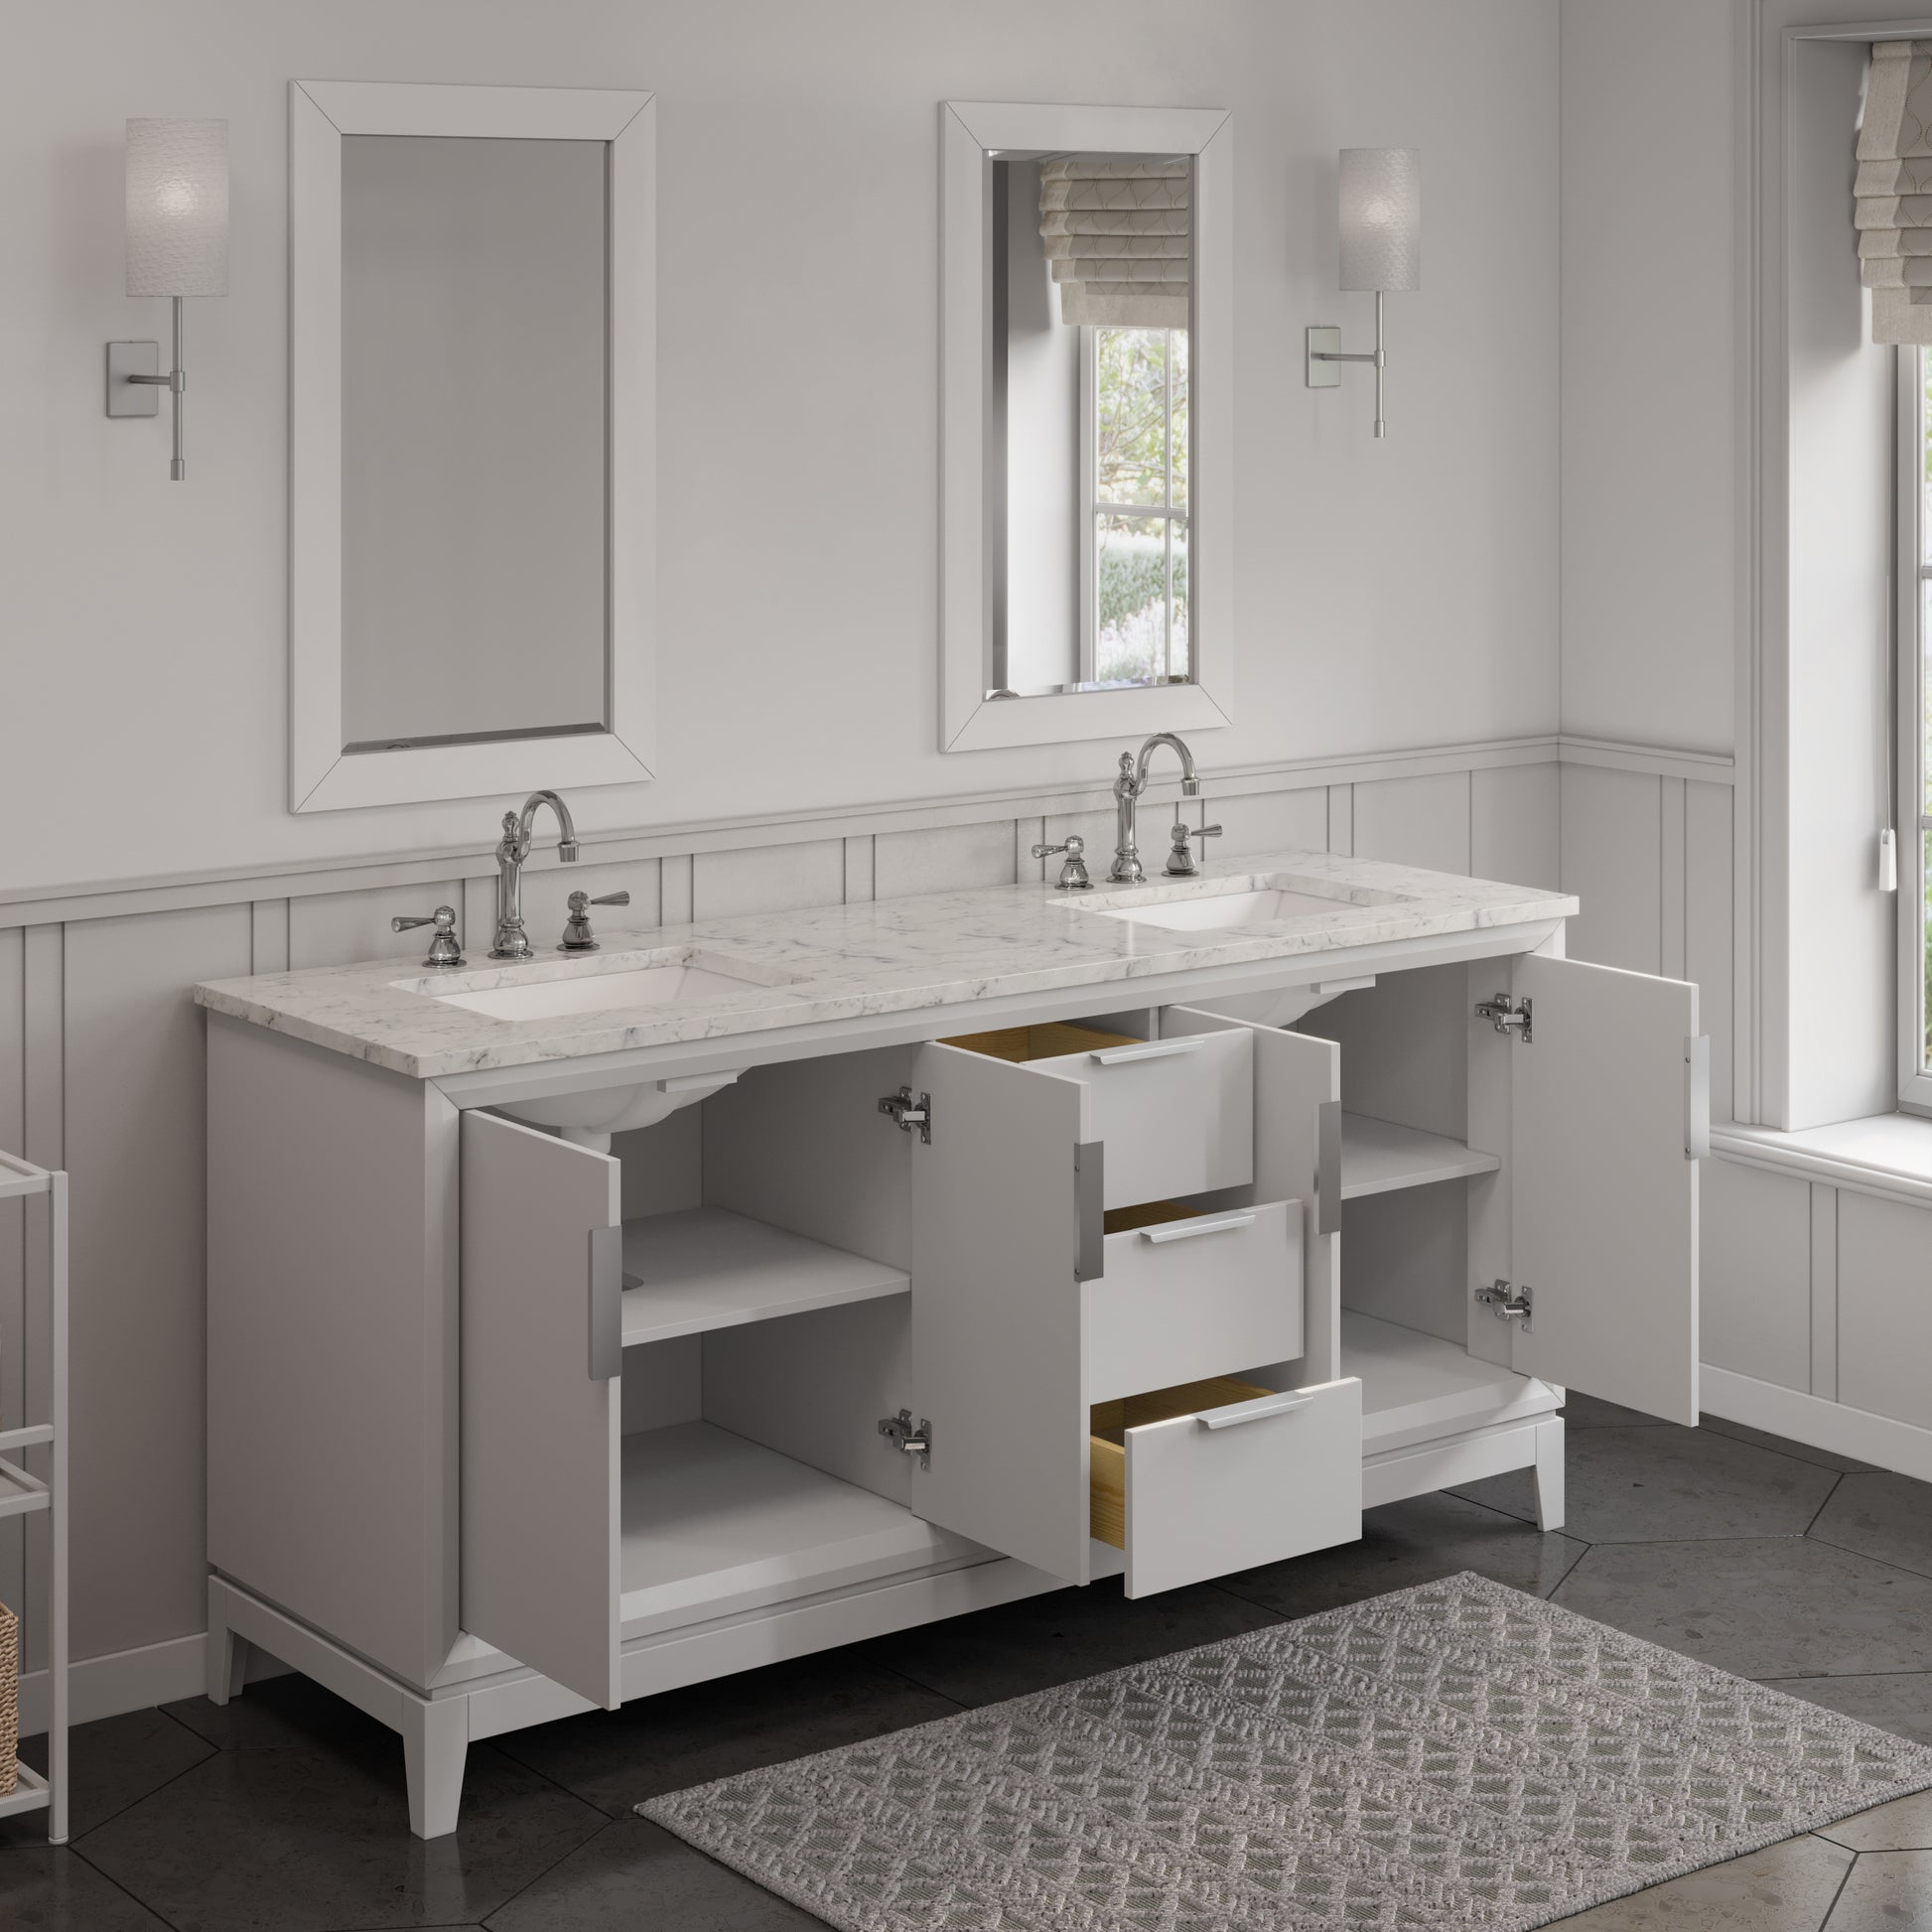 ELIZABETH 72"W x 34.25"H Pure White Double-Sink Vanity with Carrara White Marble Countertop + Faucets (F2-0012-01-TL)